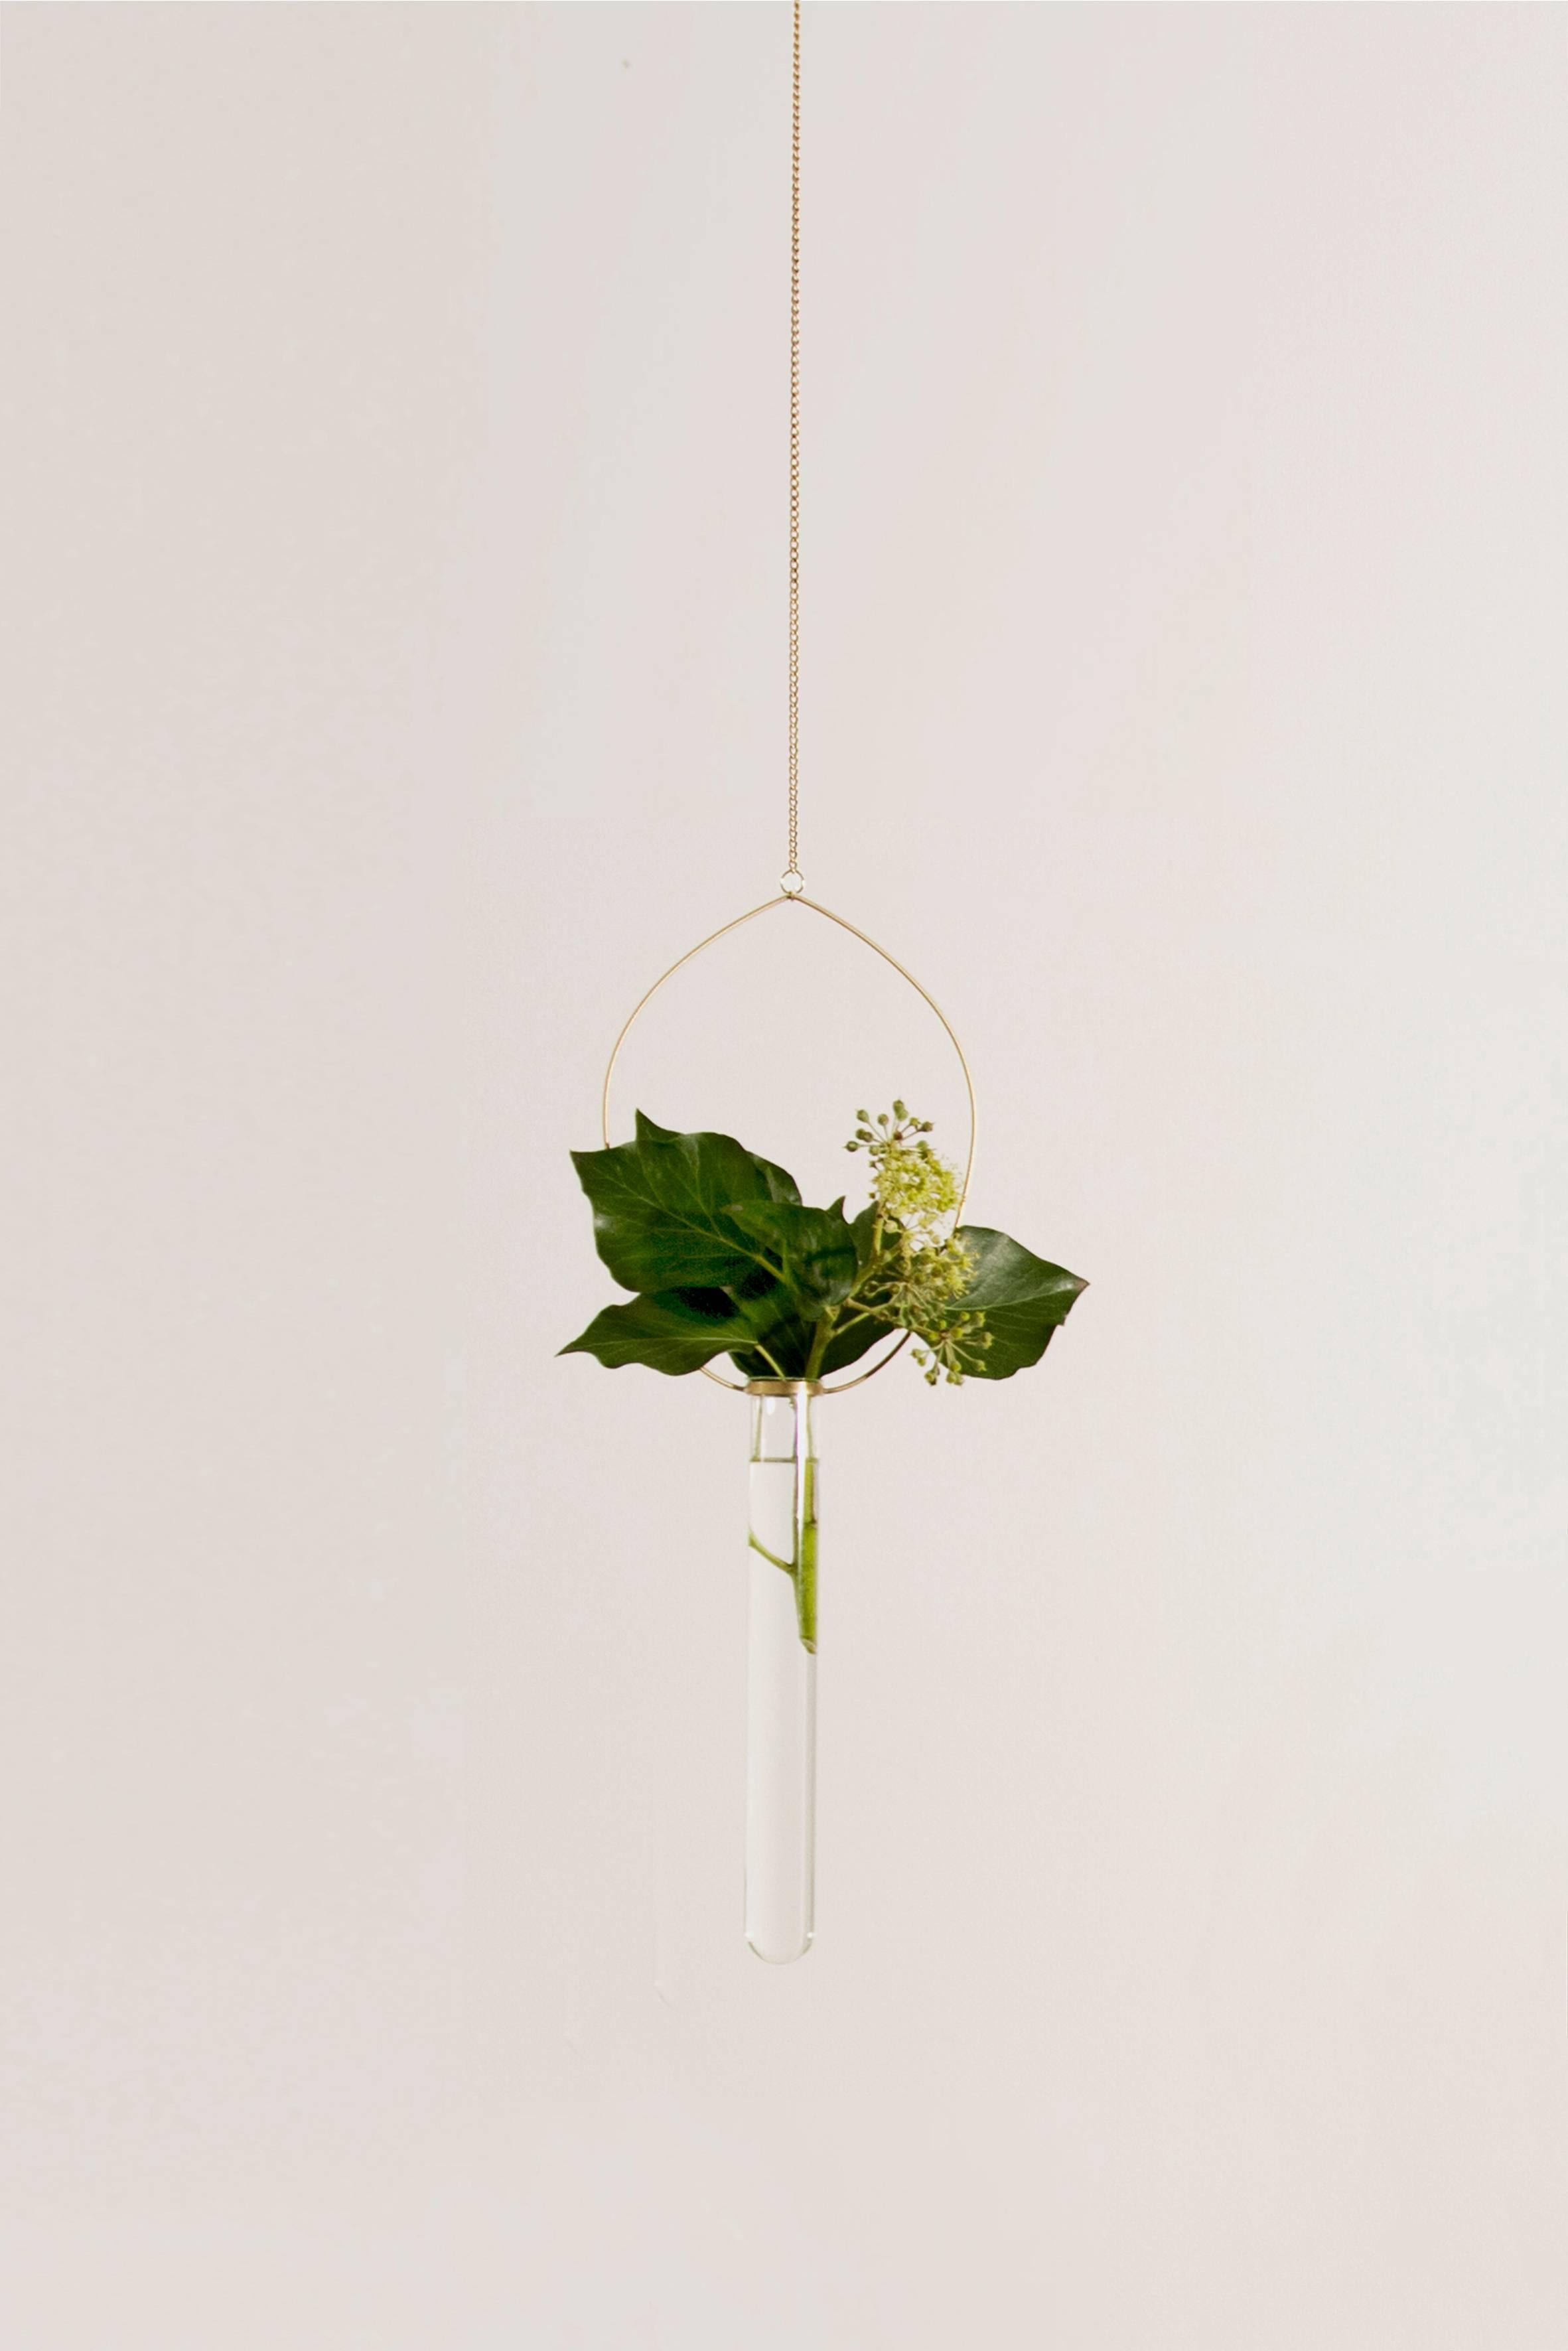 Eden, sculpture
Eden is a kinetic sculpture, composed by small floating vases that celebrate natural beauty and balance.
Materials: handcrafted solid brass with satin finish, borosilicate glass
Dimensions: 150 x 37 x 23 cm

The project is